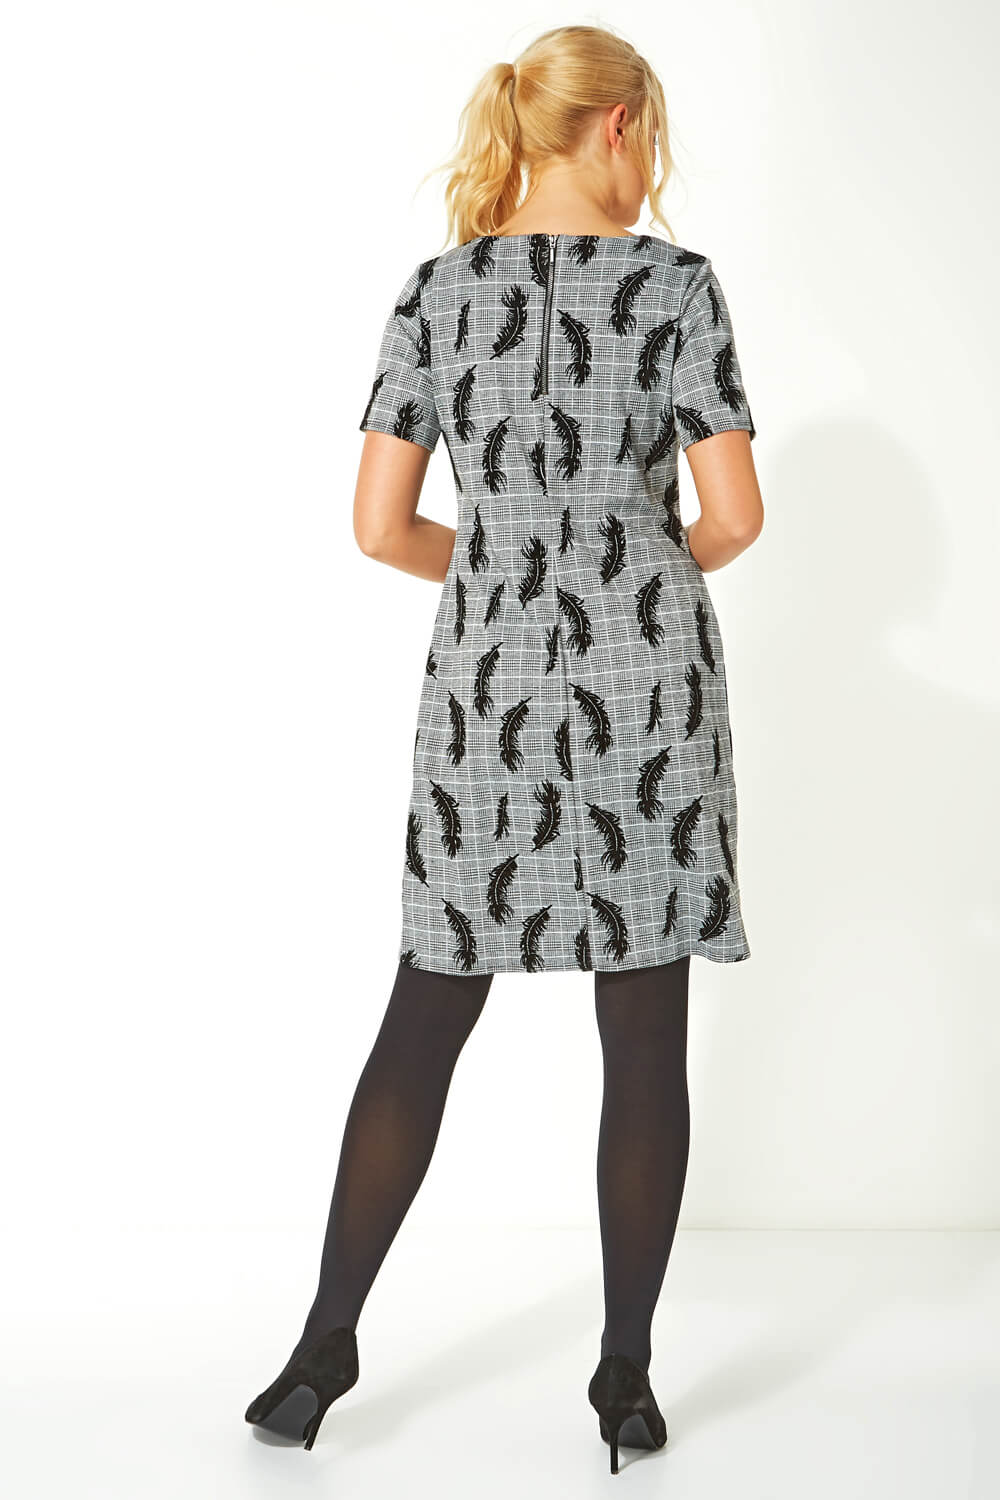 Grey Feather Checked Smart Shift Dress, Image 3 of 5